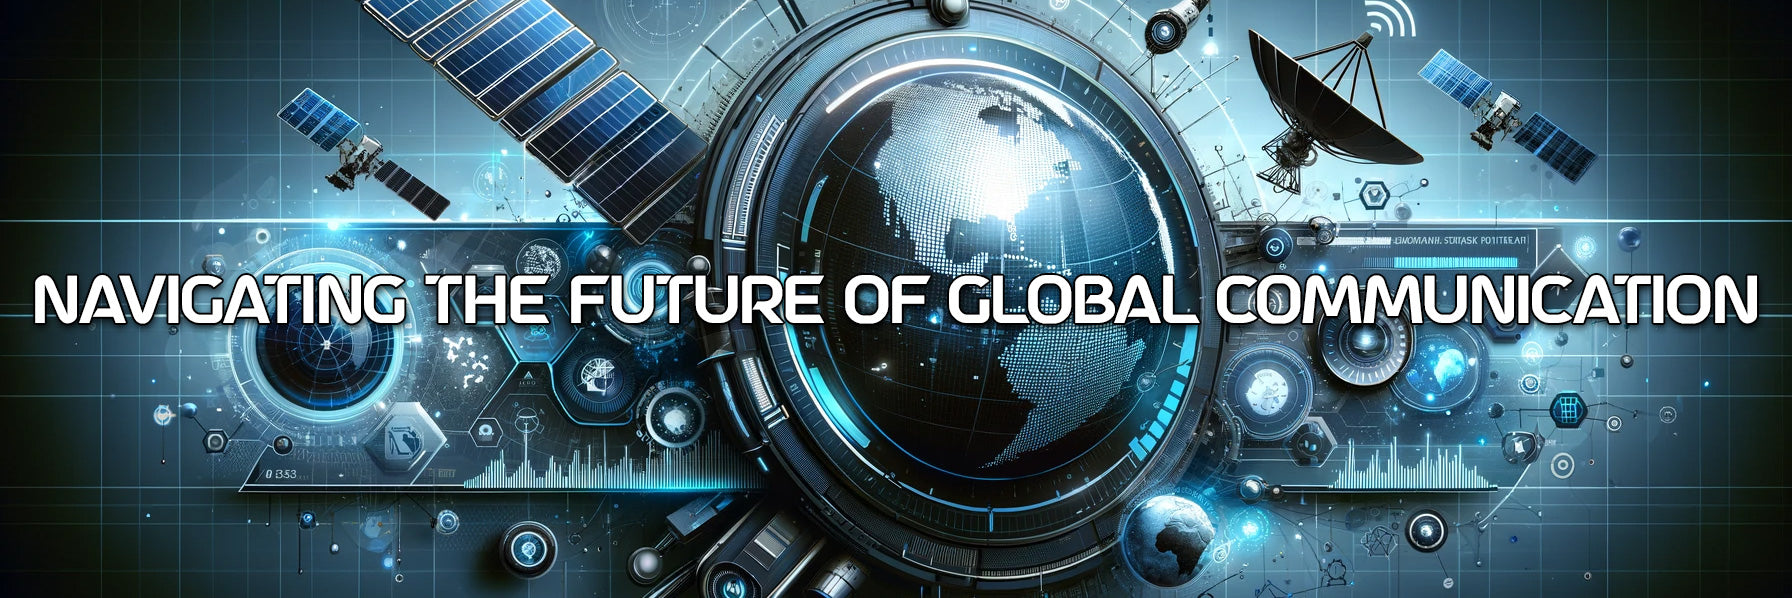 Navigating the Future of Global Communication